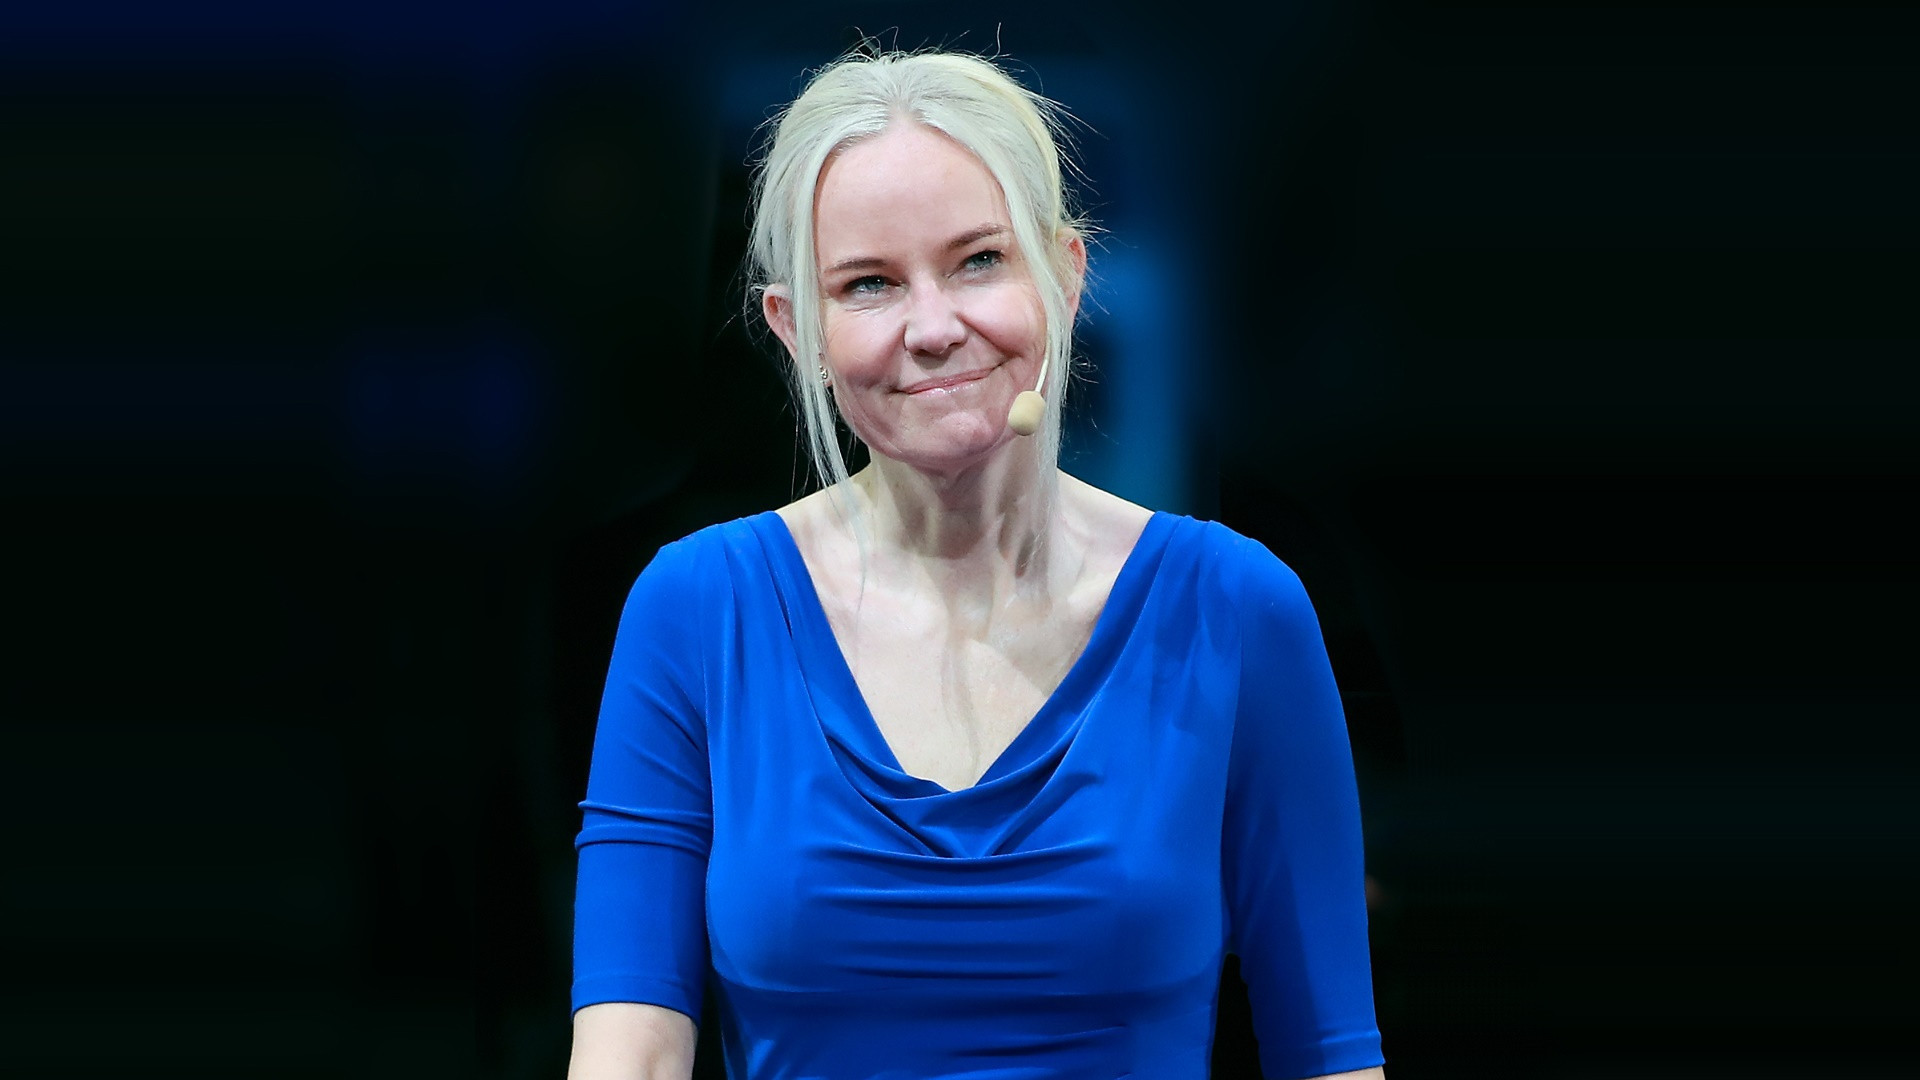 Petra Sörling is the first-ever female President of the International Table Tennis Federation ©ITTF